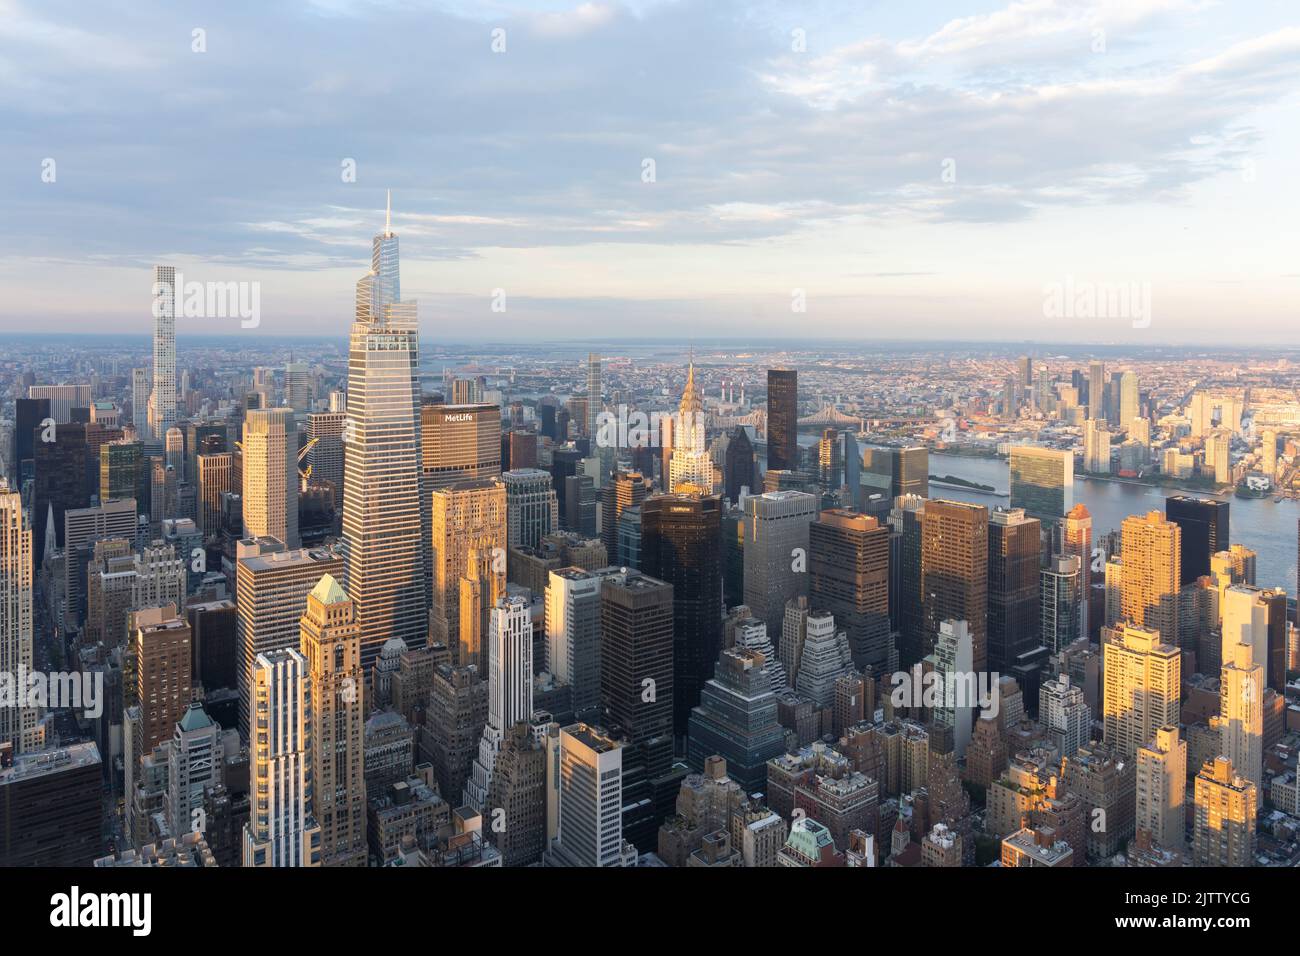 New York, NY, USA - August 20, 2022: Manhattan skyline view from the top of the Empire State Building looking North East at dusk in New York, NY, USA Stock Photo